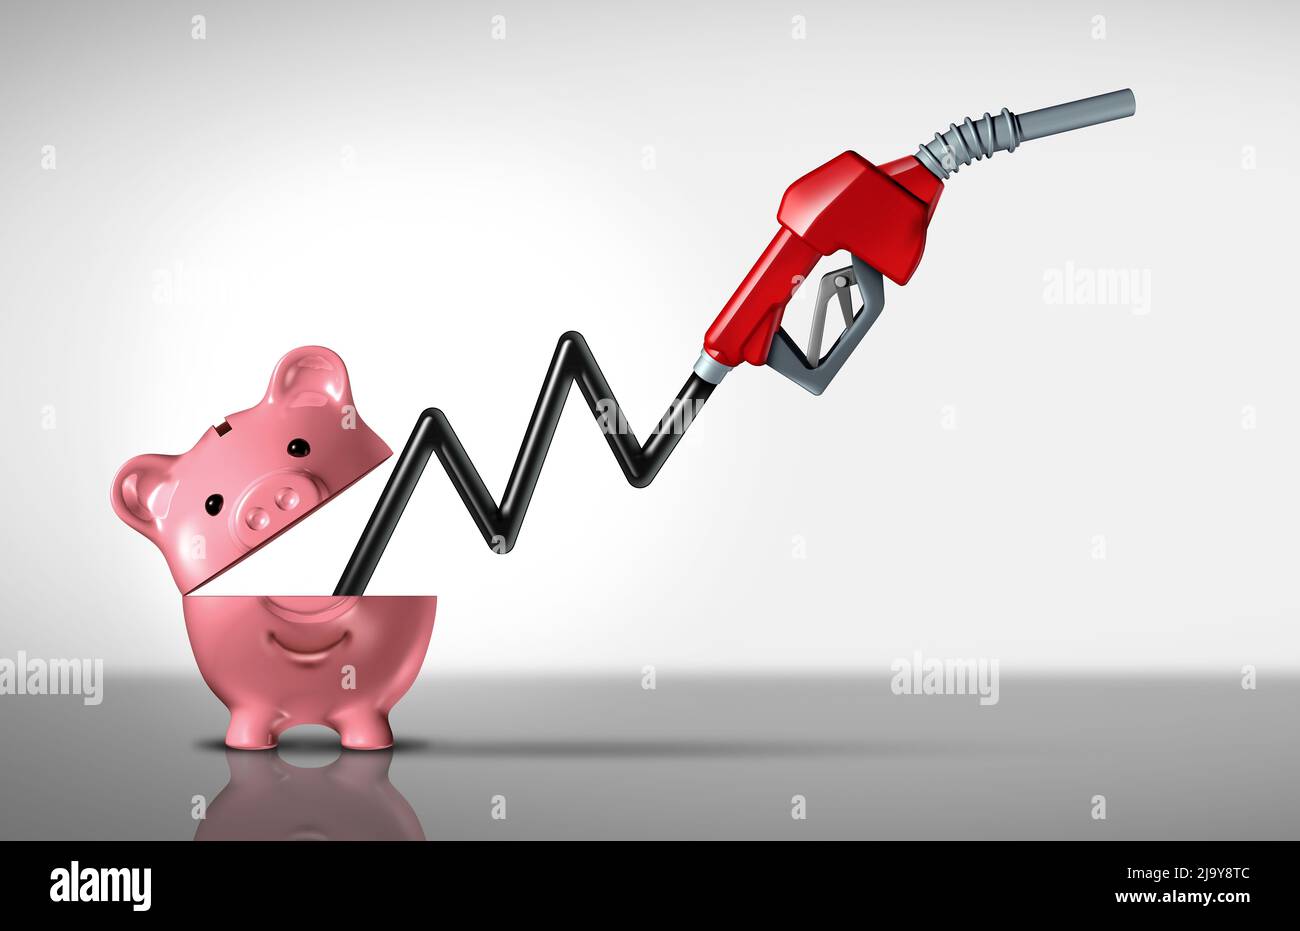 Gas price climb with a fuel pump as an economic challenge or rising car fueling prices and oil increase concept with an open piggy bank. Stock Photo